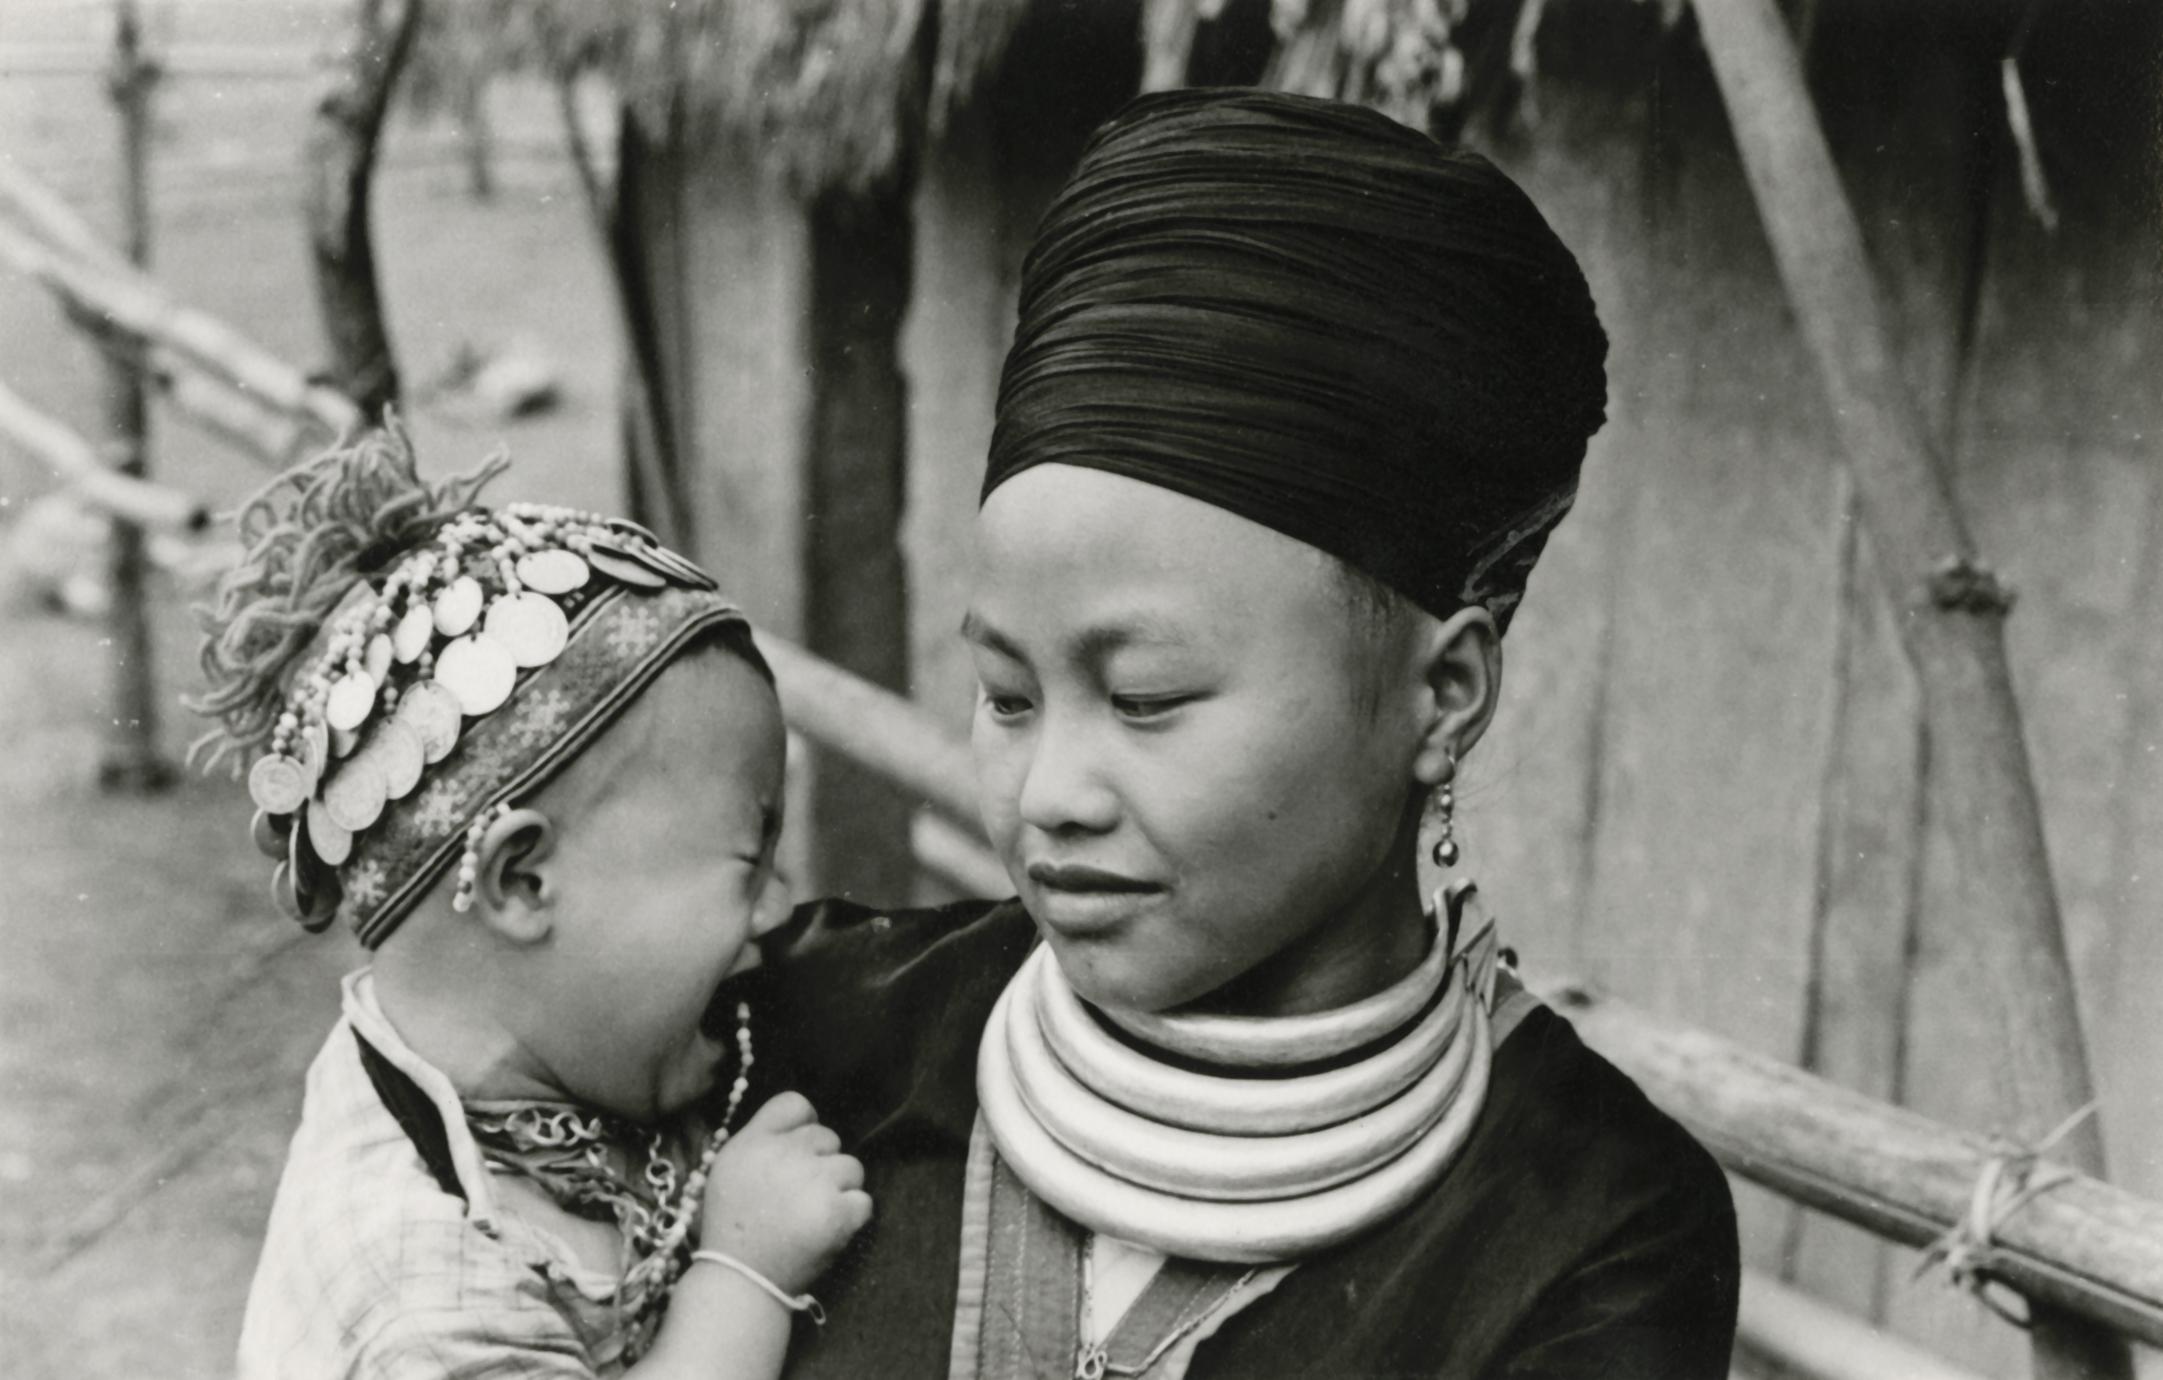 A Blue Hmong (Hmong Njua) woman with her child in a Hmong village in the vicinity of Muang Vang Vieng in Vientiane Province